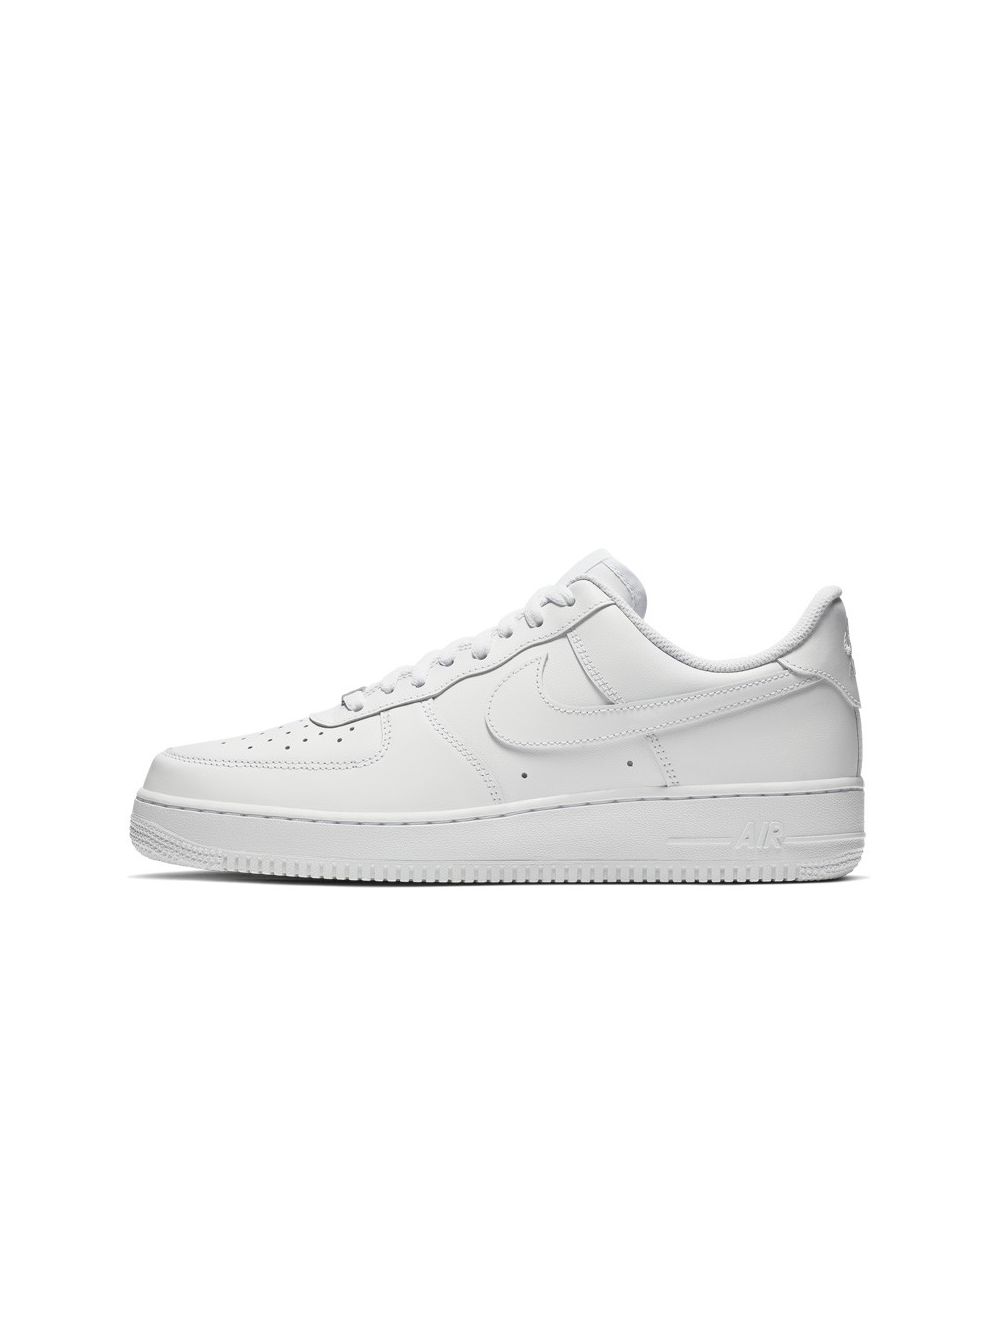 size 4.5 air force 1